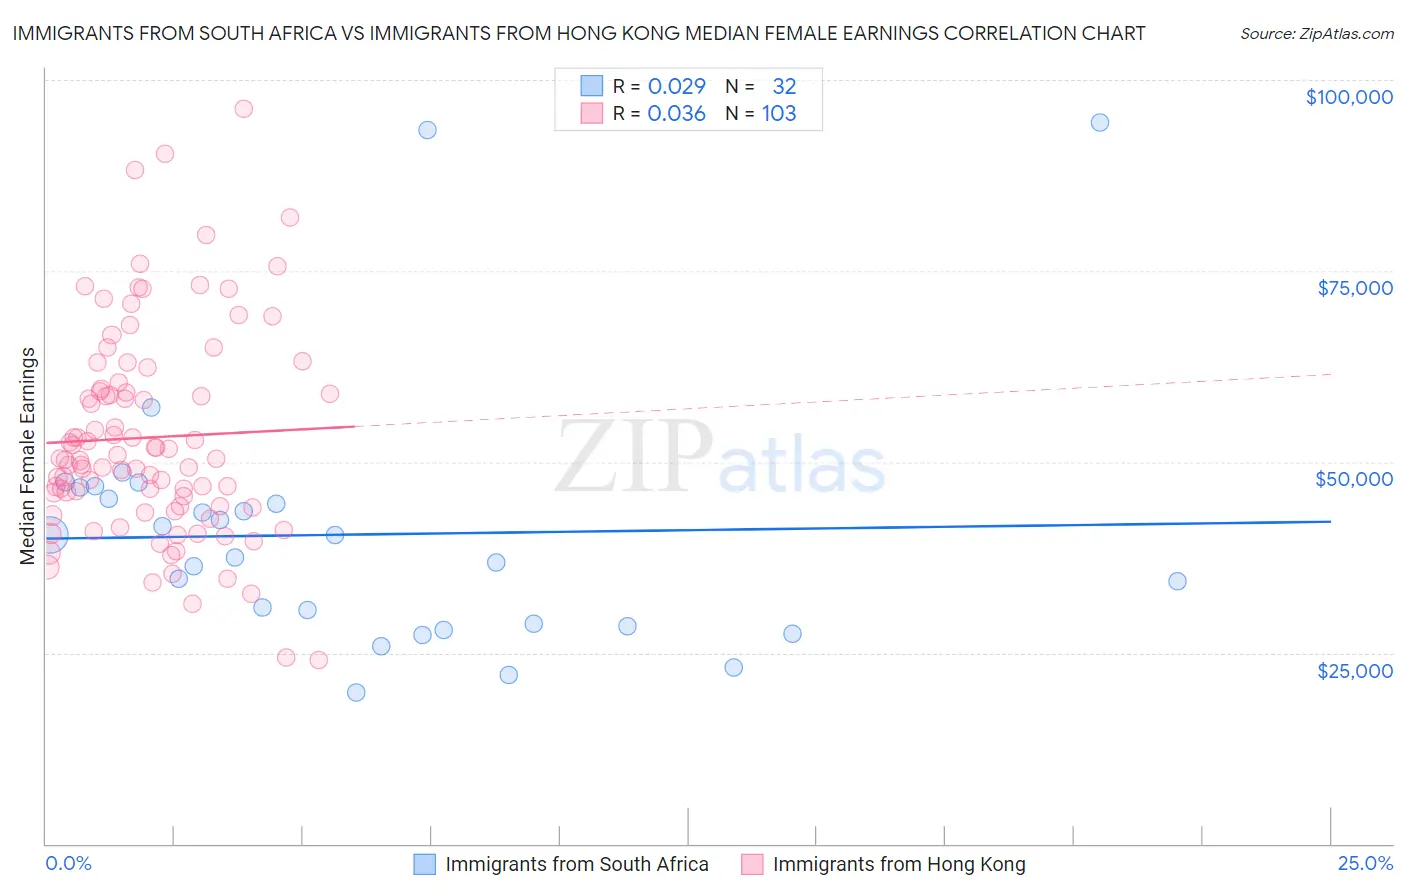 Immigrants from South Africa vs Immigrants from Hong Kong Median Female Earnings